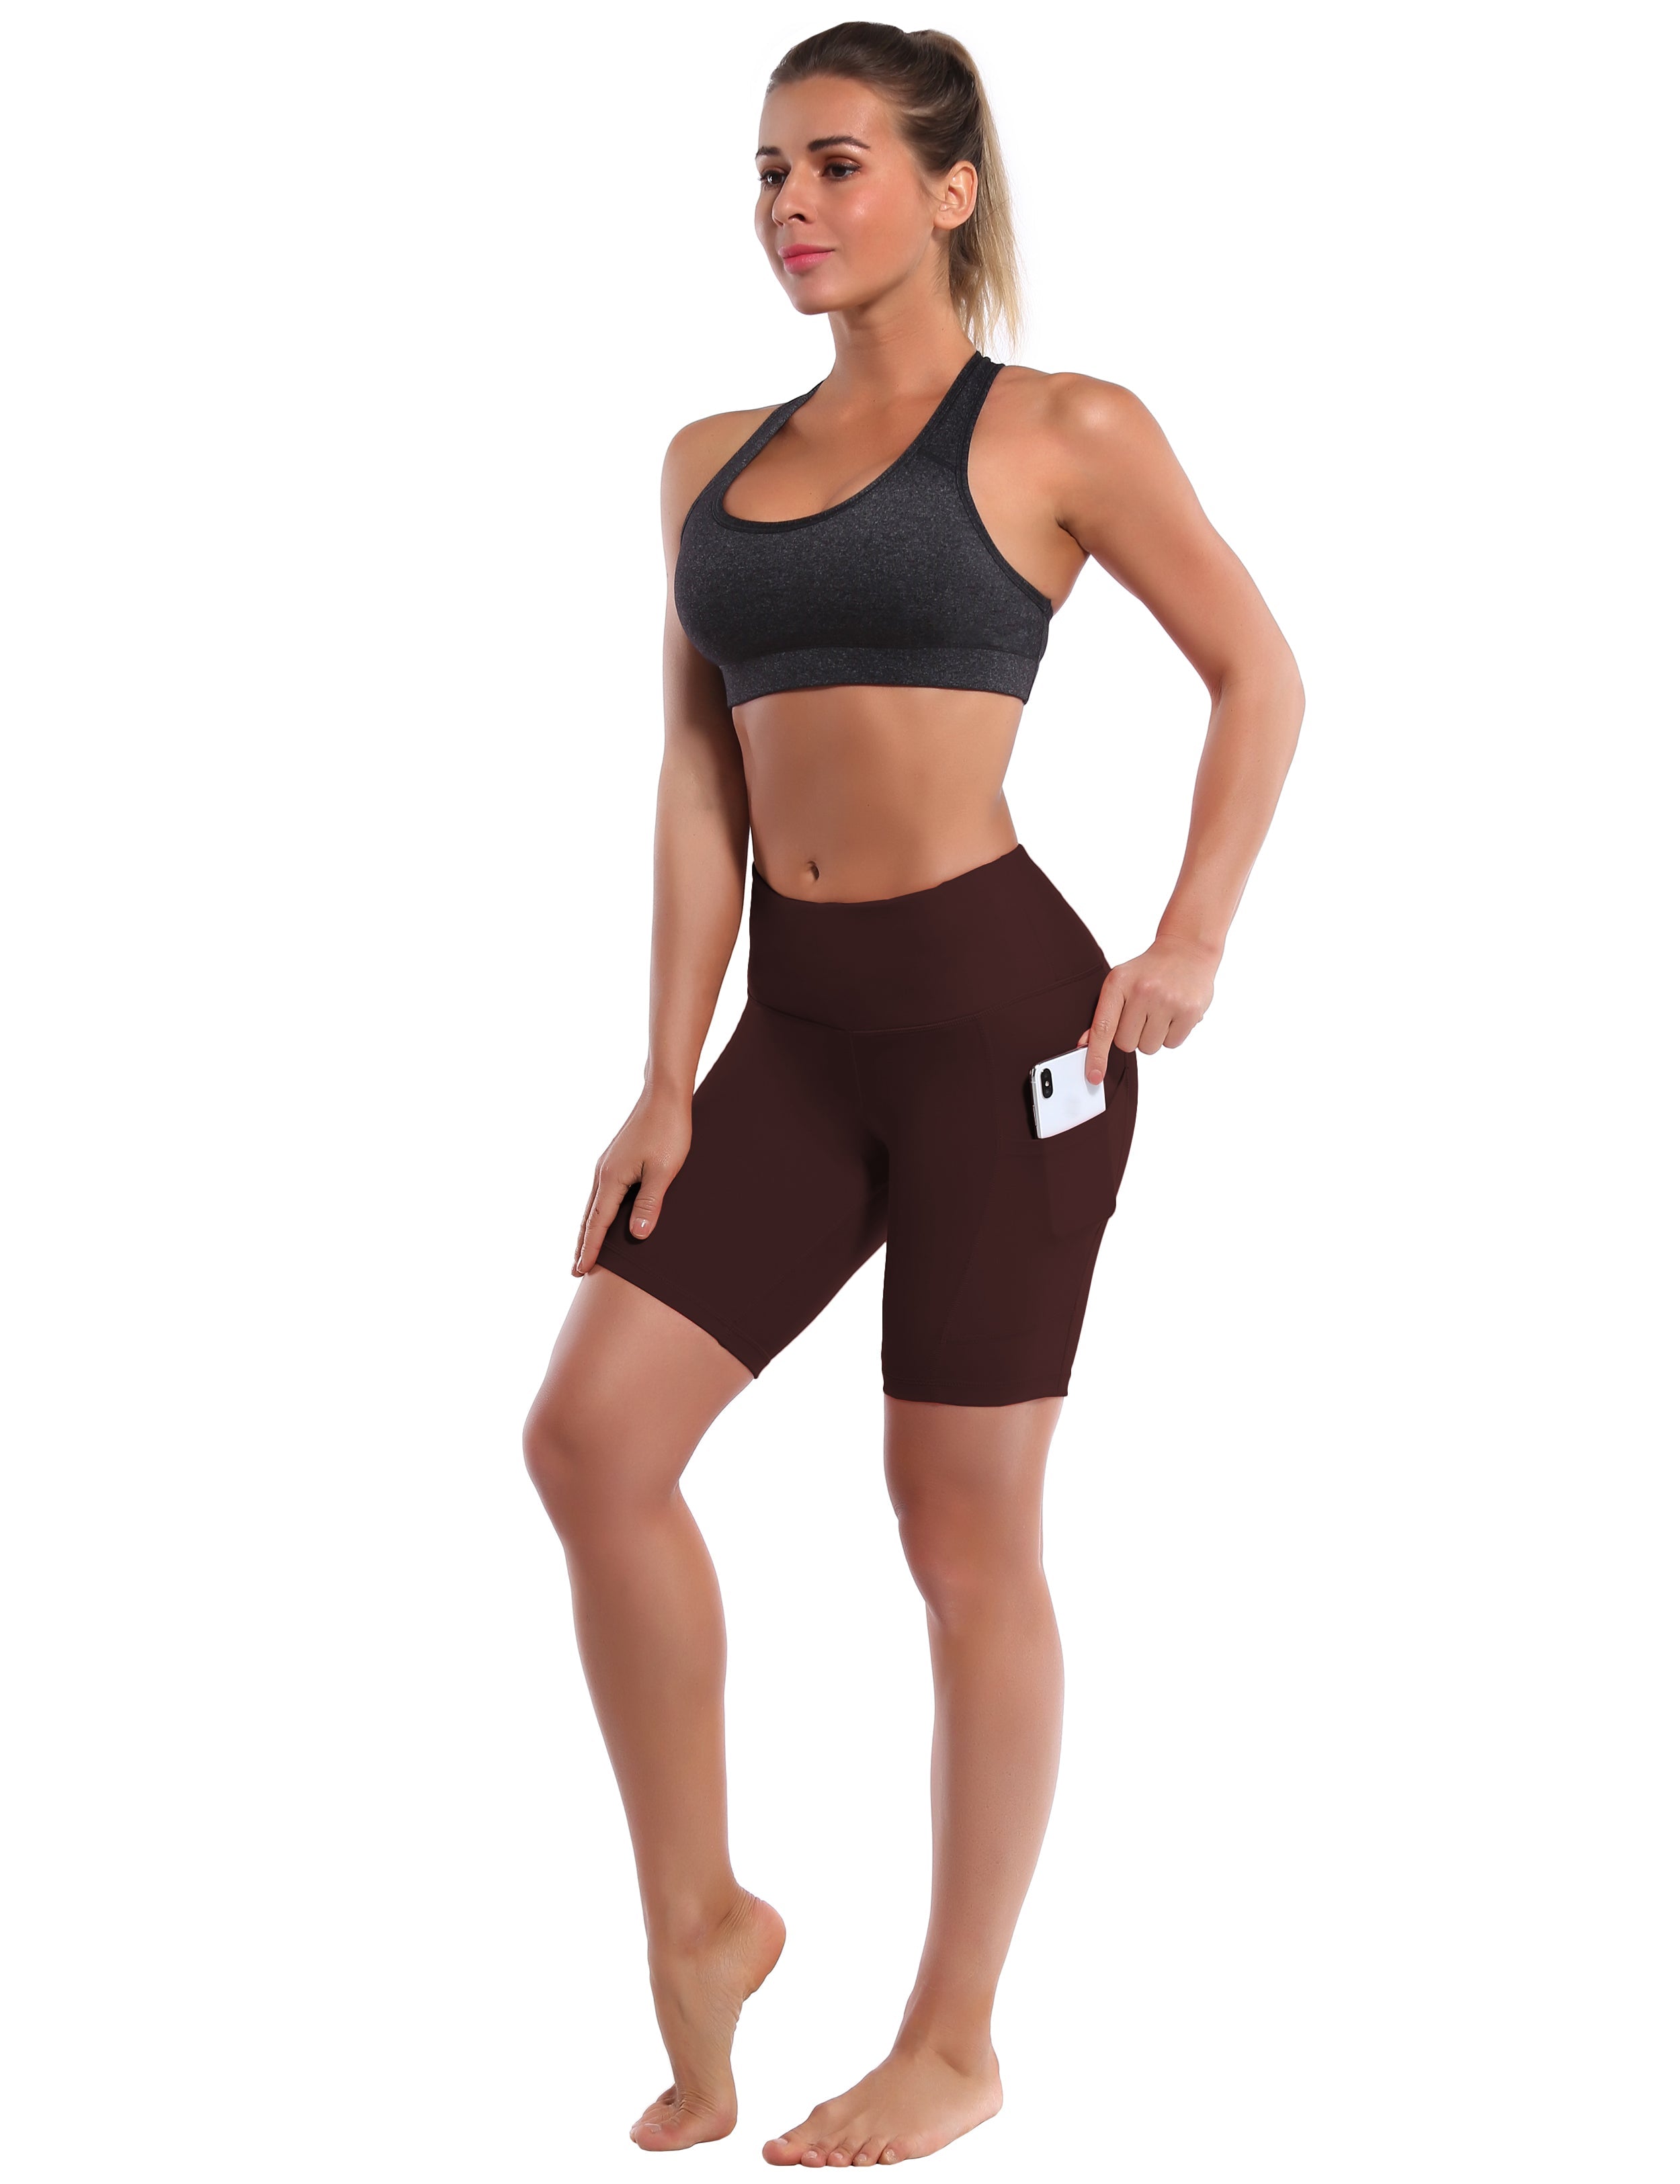 8" Side Pockets yogastudio Shorts mahoganymaroon Sleek, soft, smooth and totally comfortable: our newest style is here. Softest-ever fabric High elasticity High density 4-way stretch Fabric doesn't attract lint easily No see-through Moisture-wicking Machine wash 75% Nylon, 25% Spandex